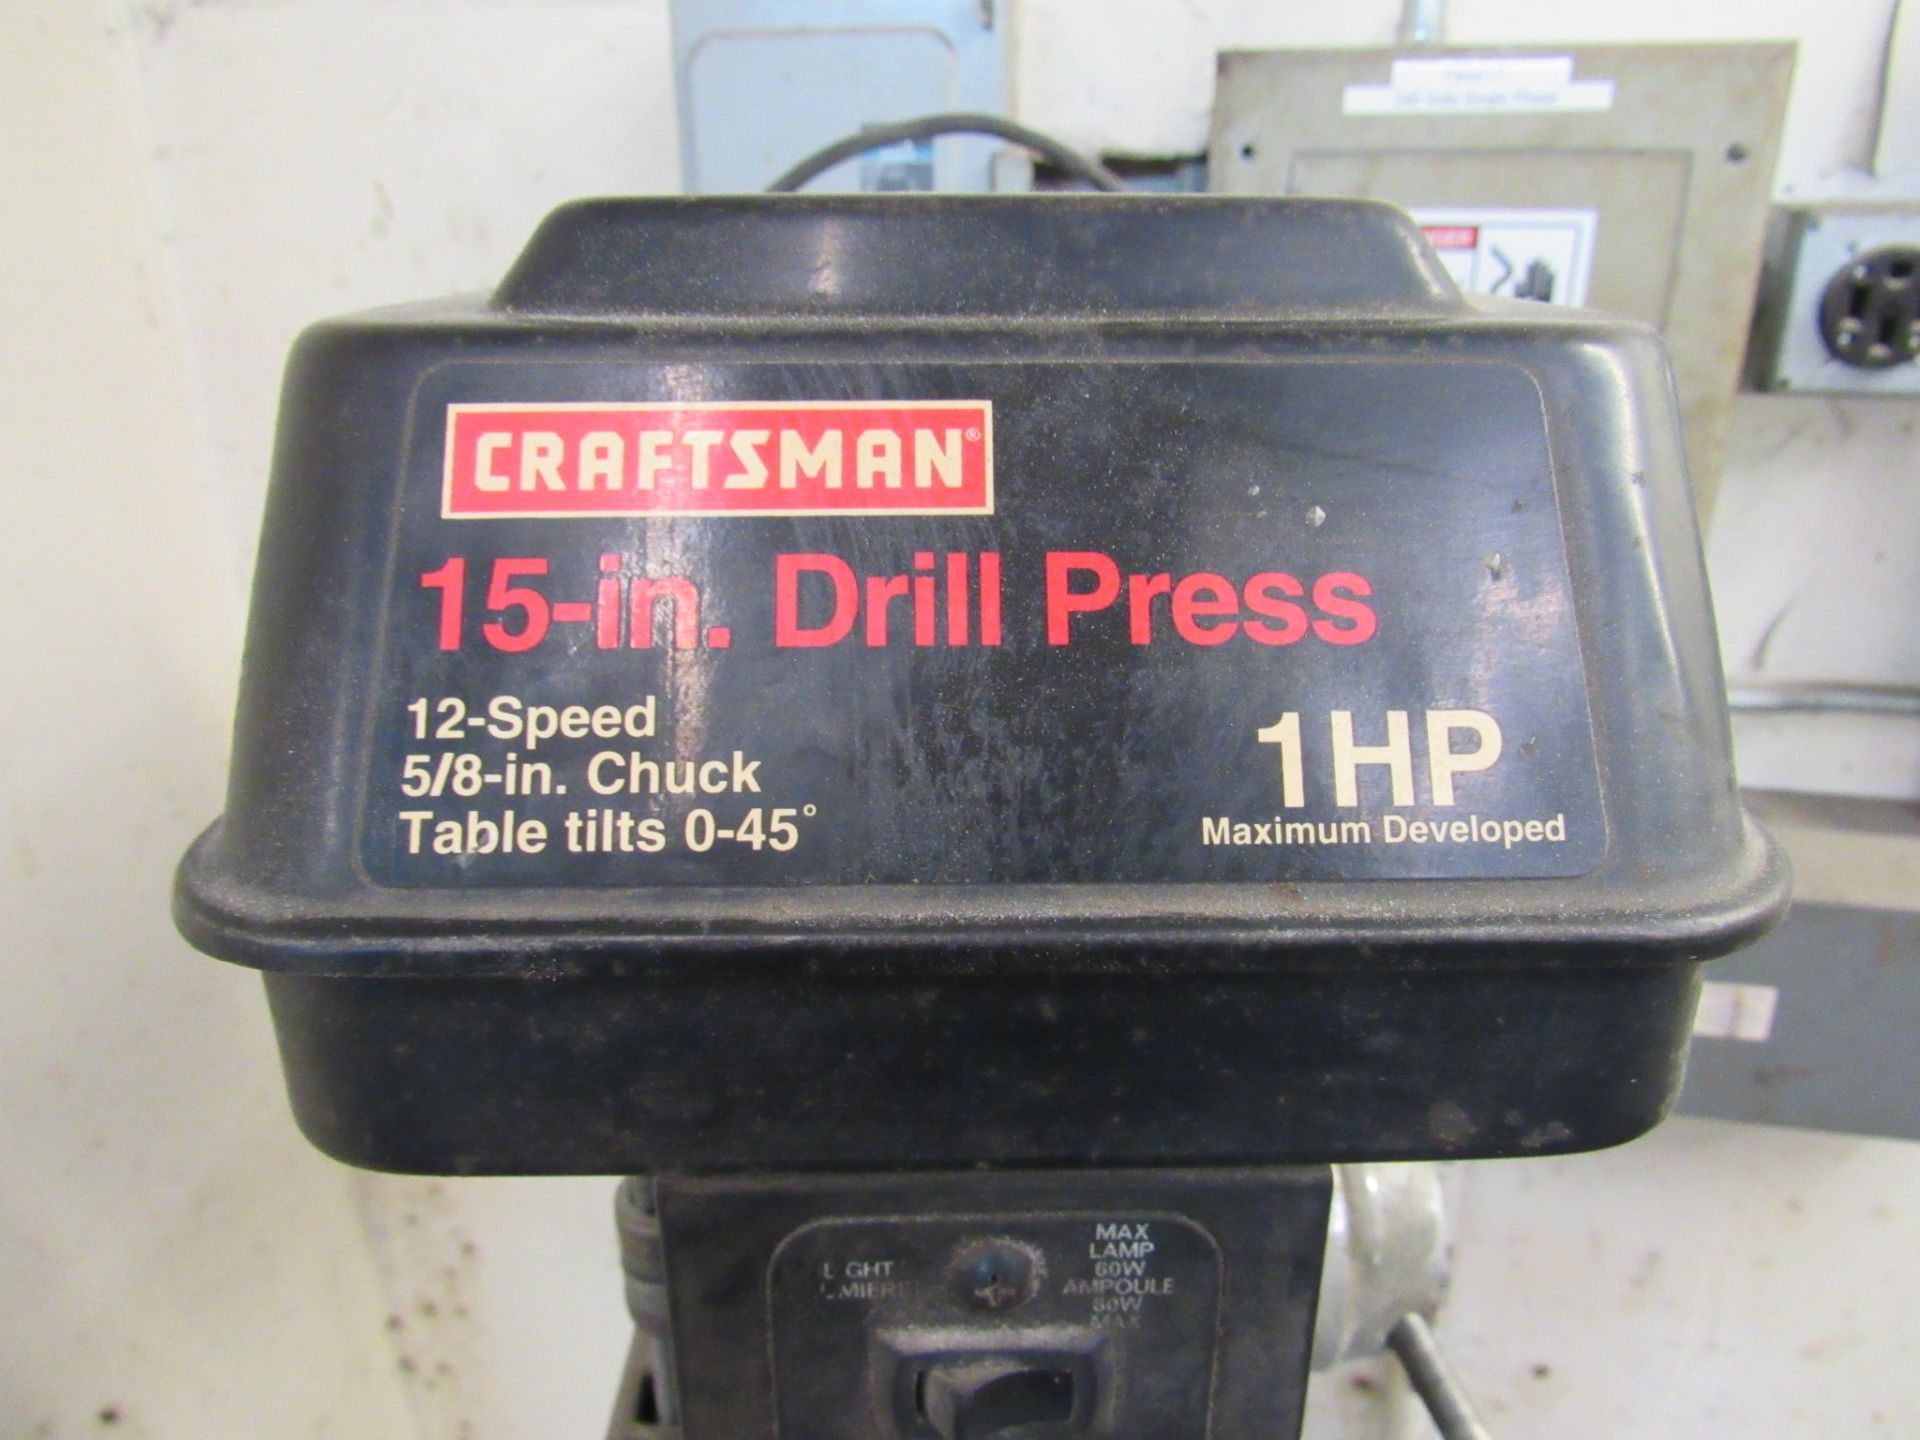 15" Craftsman Drill Press, 12 speed, 5/8" chuck, table tilt 0 - 45 degrees, 1 HP - Image 2 of 3